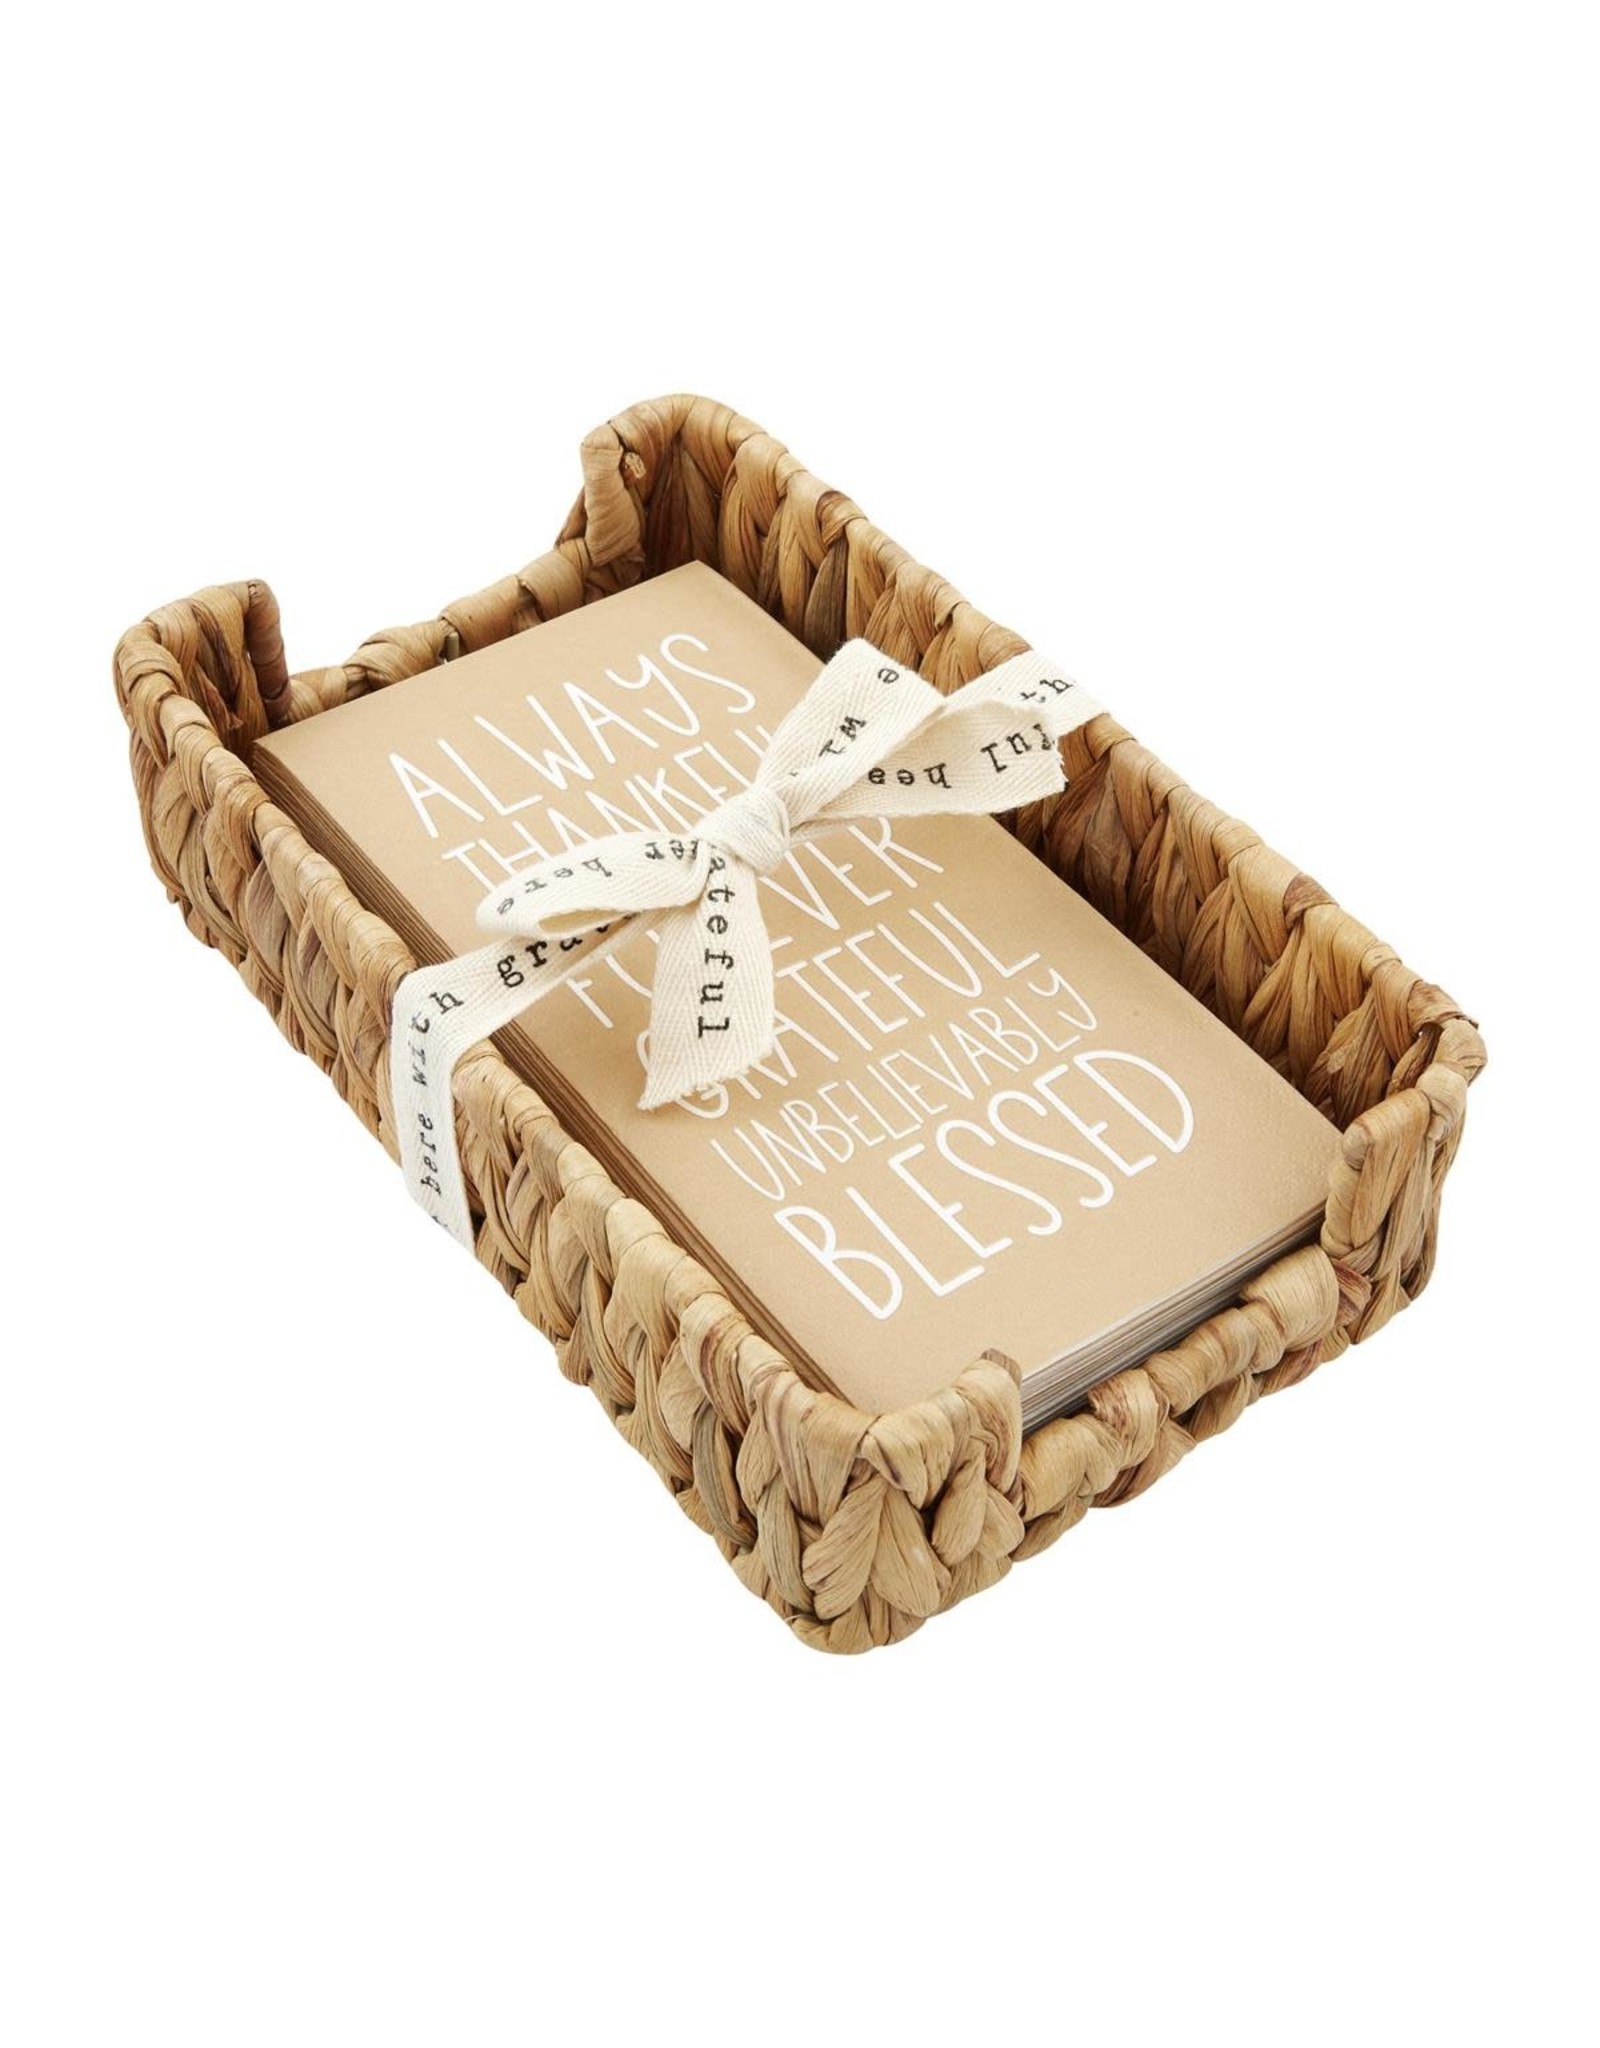 Mud Pie Thanksgiving Blessed Guest Towel Napkin In Basket Set